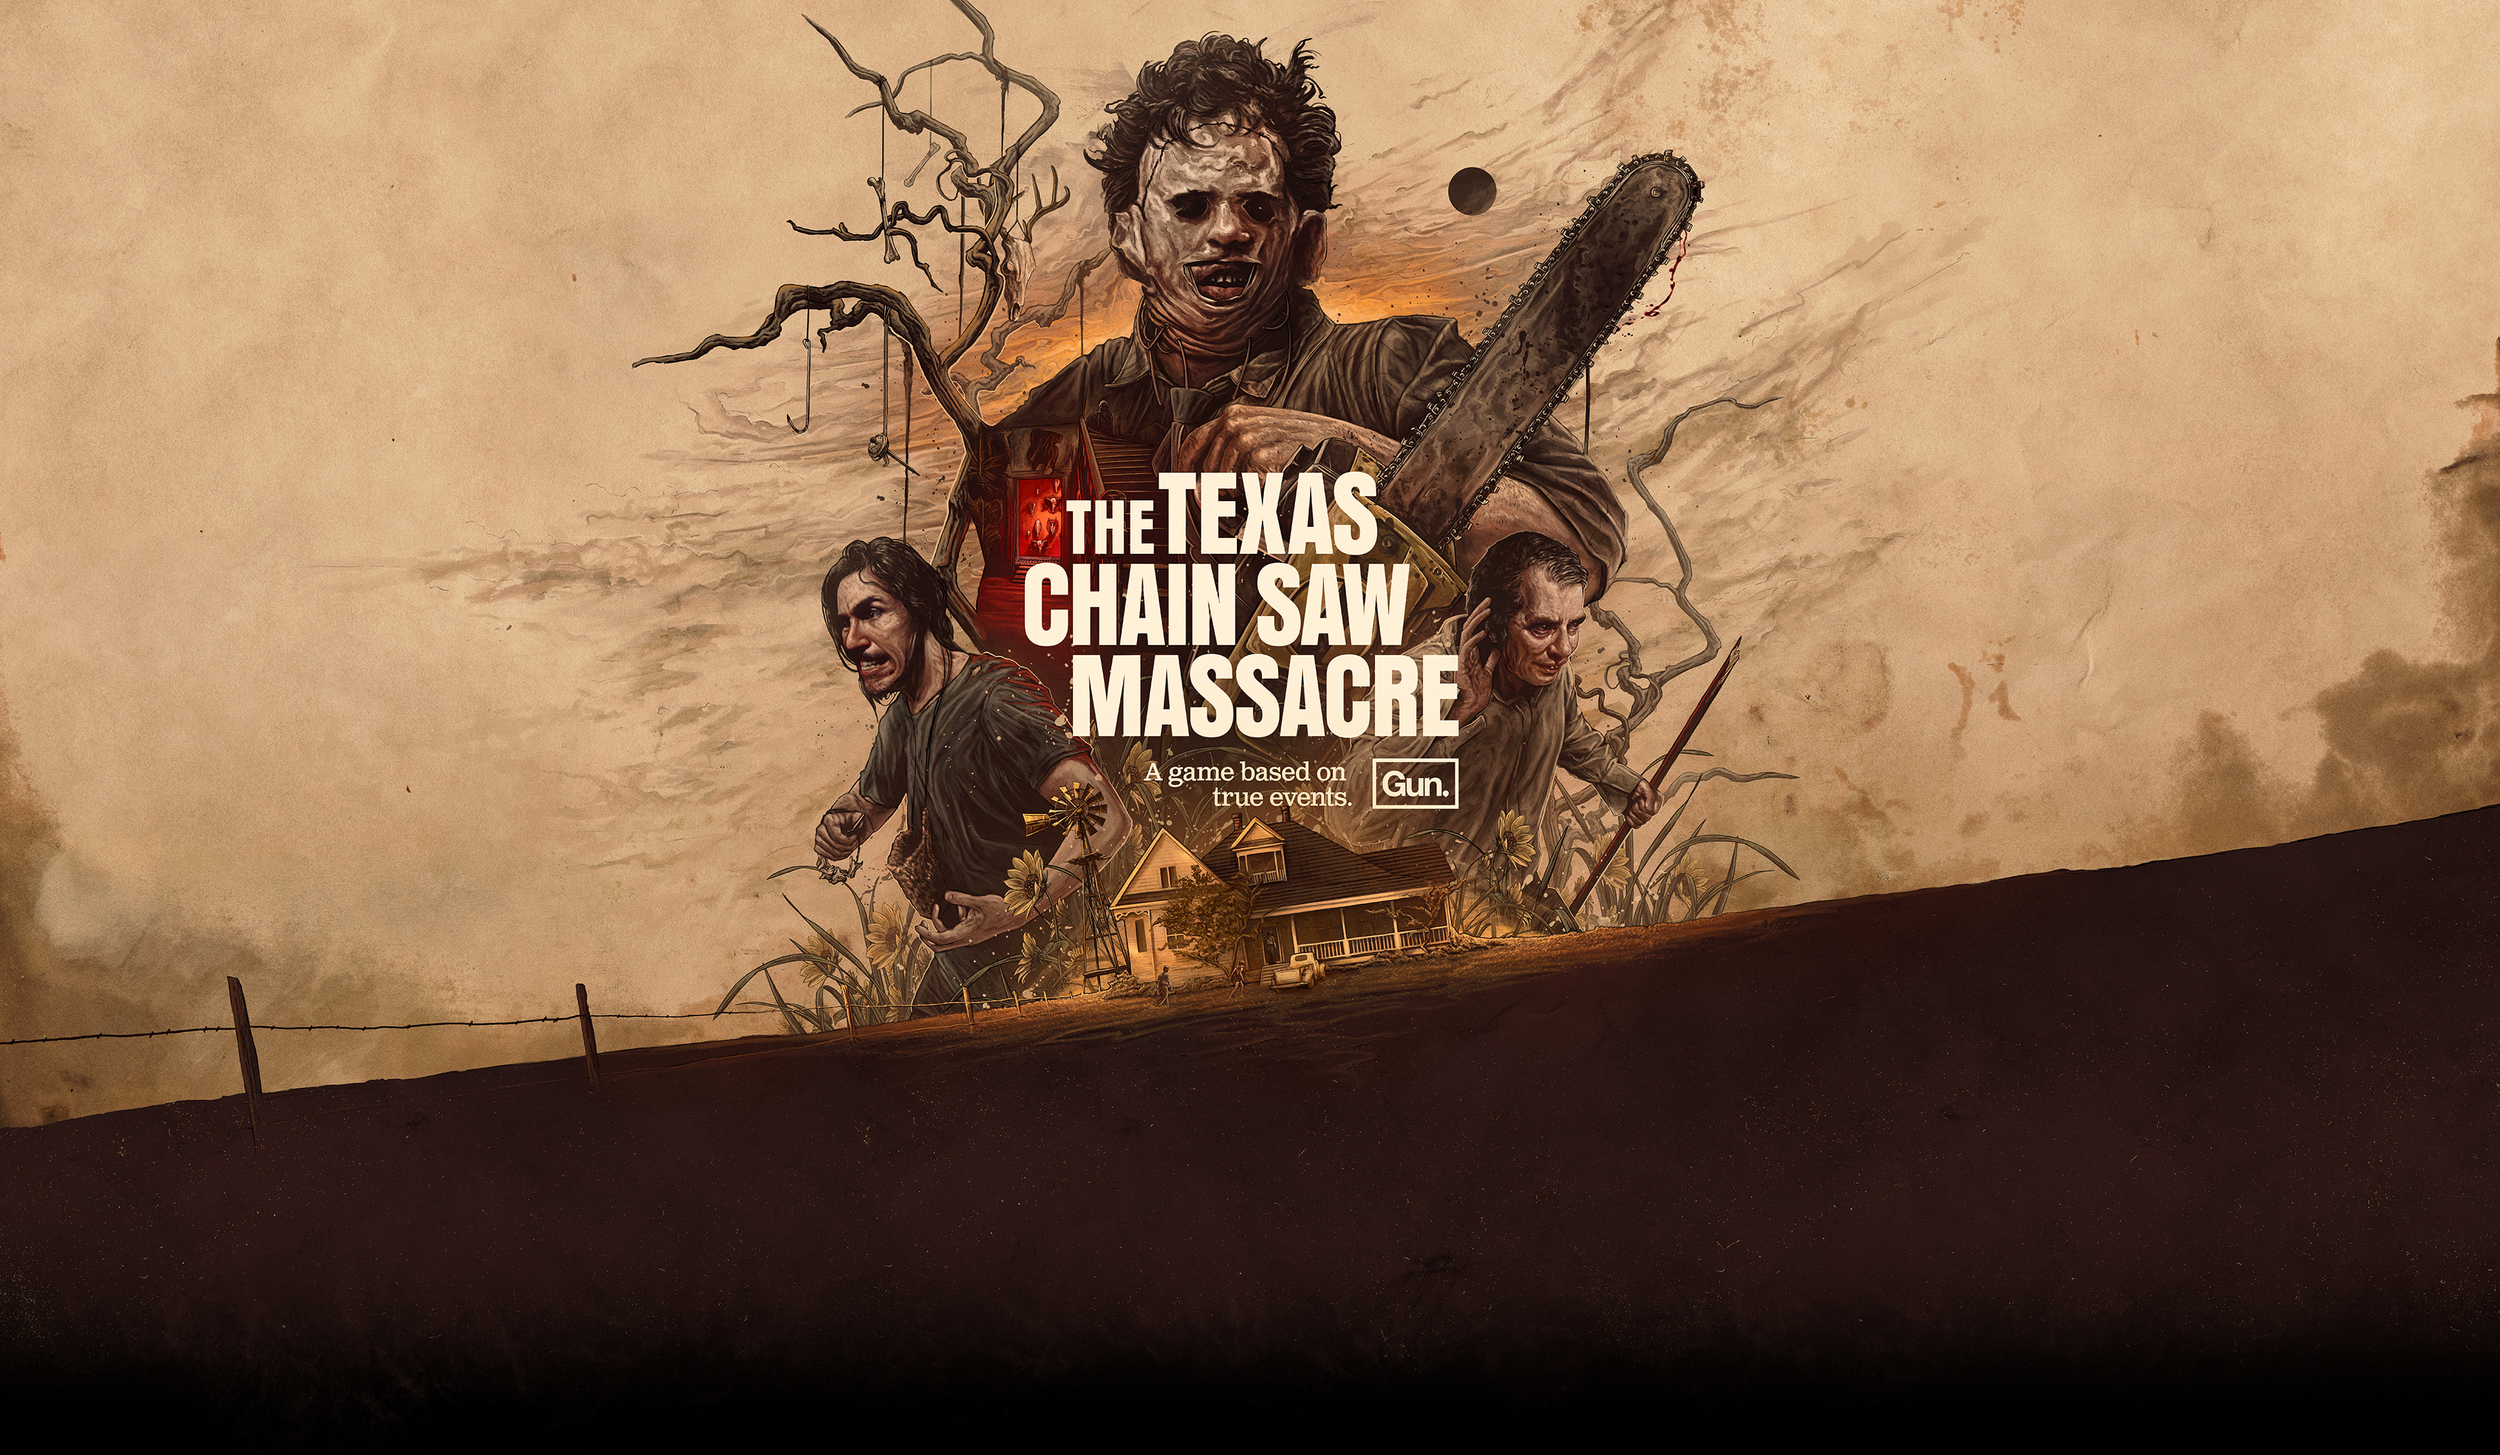 Image for Asymmetrical horror game The Texas Chain Saw Massacre looks like gritty fun